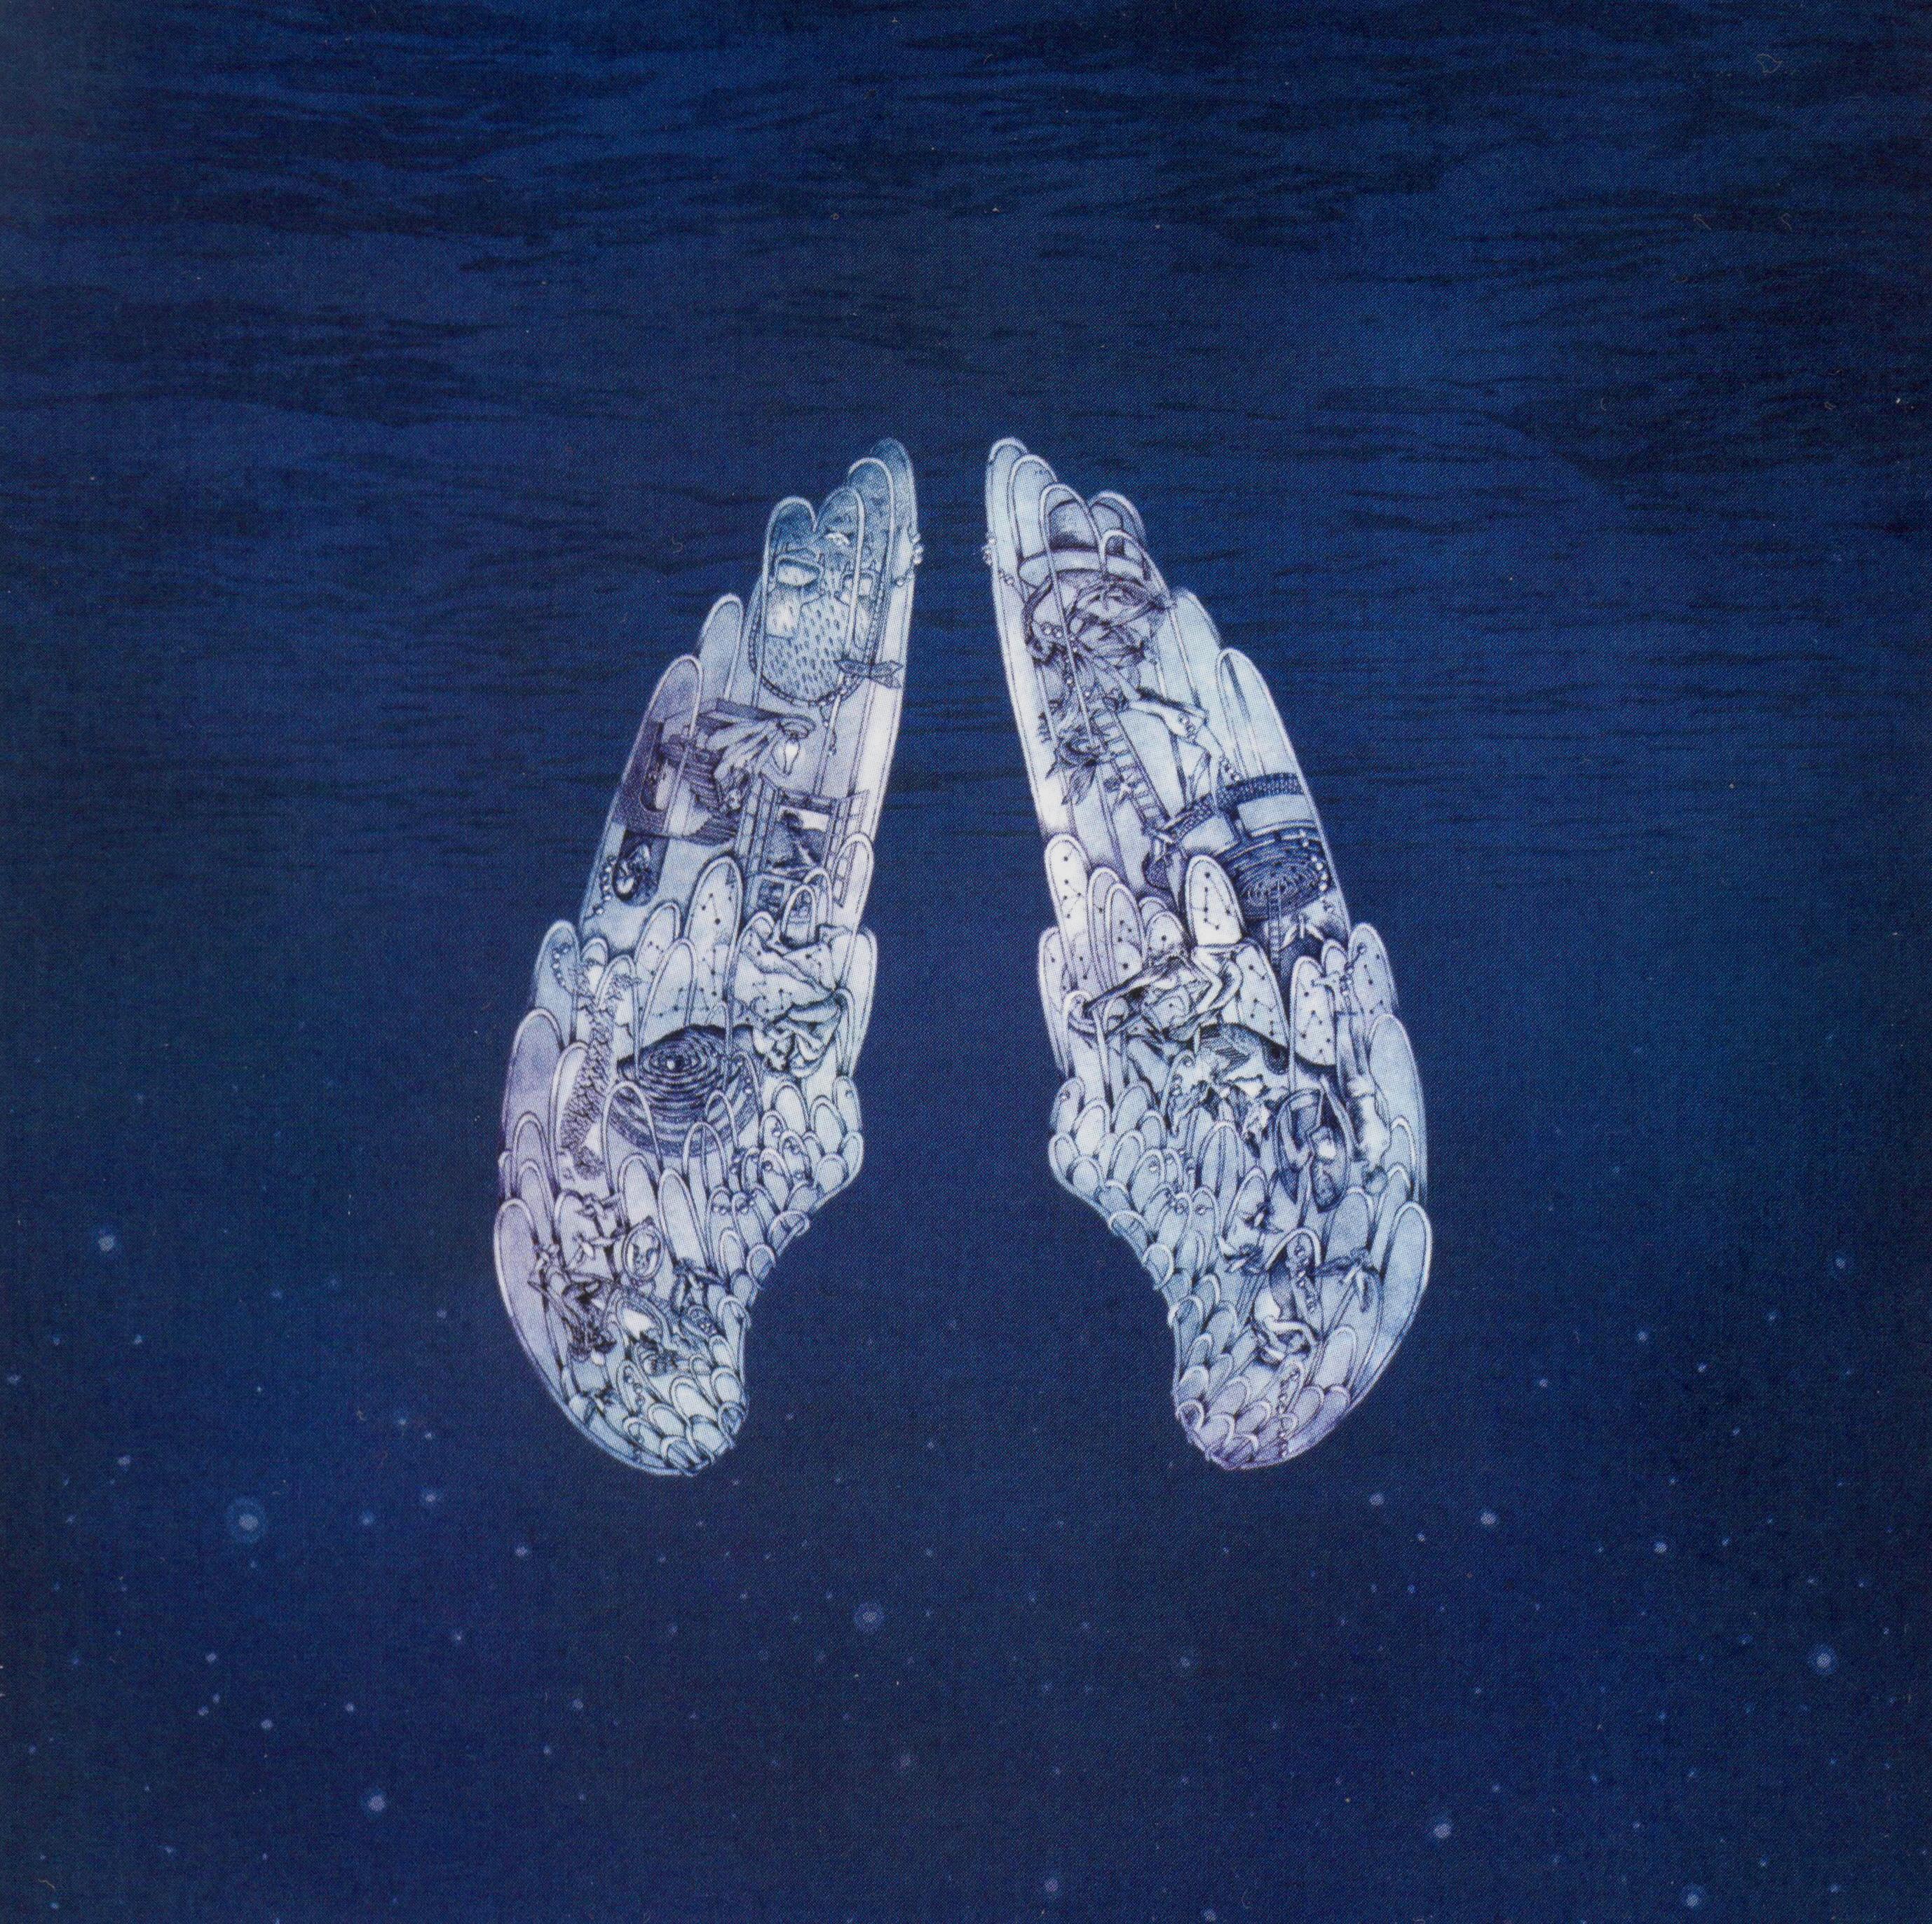 coldplay ghost stories